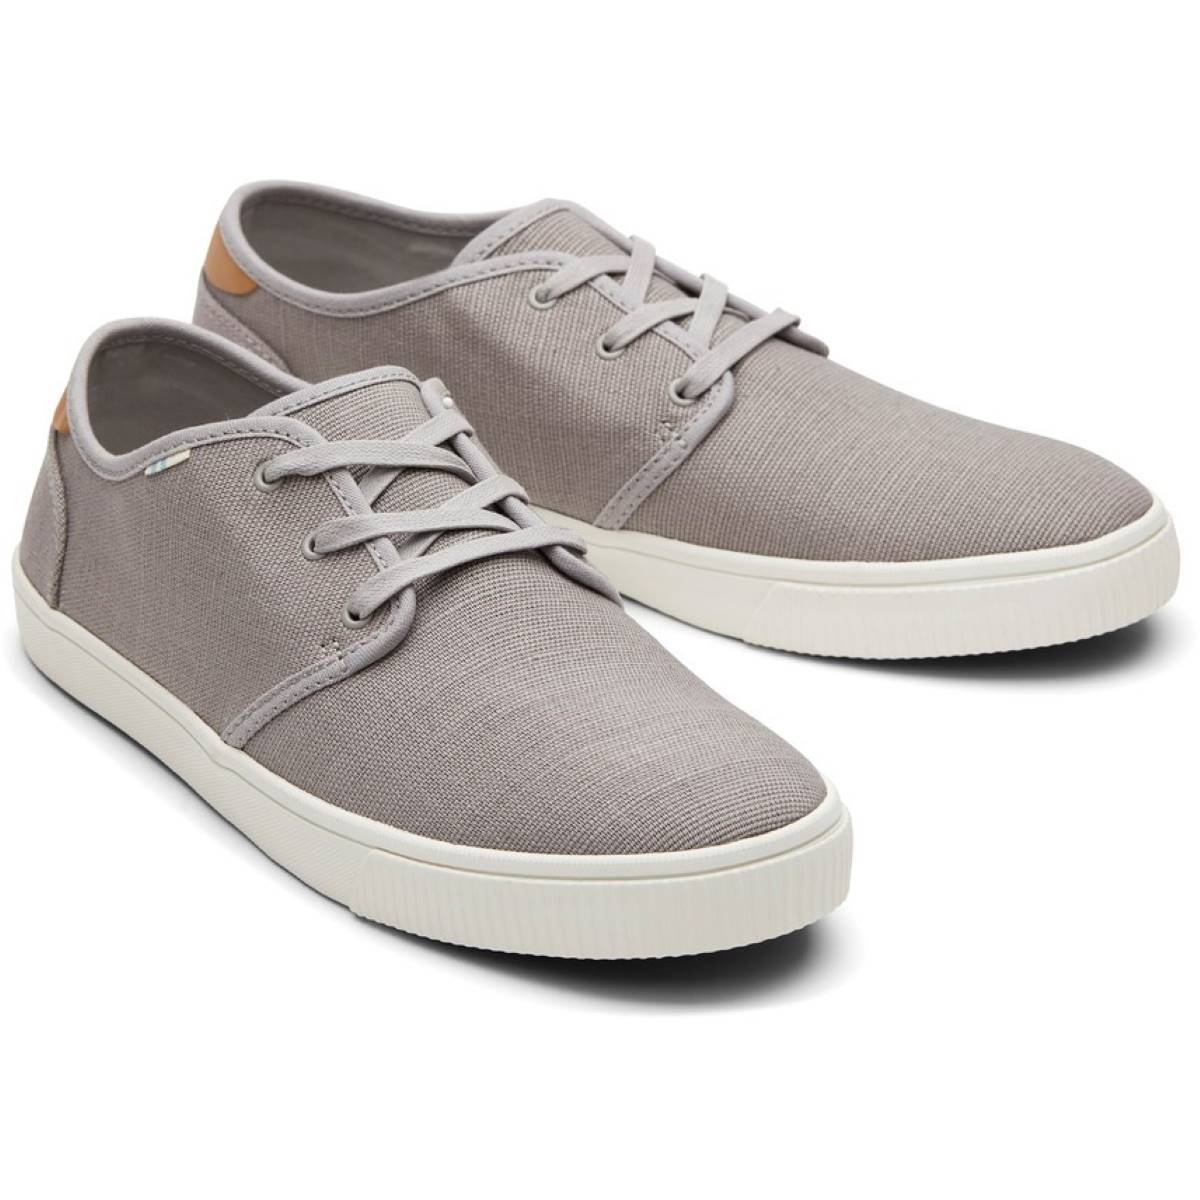 Toms Carlo Brown Mens trainers 10013285 in a Plain Canvas in Size 10